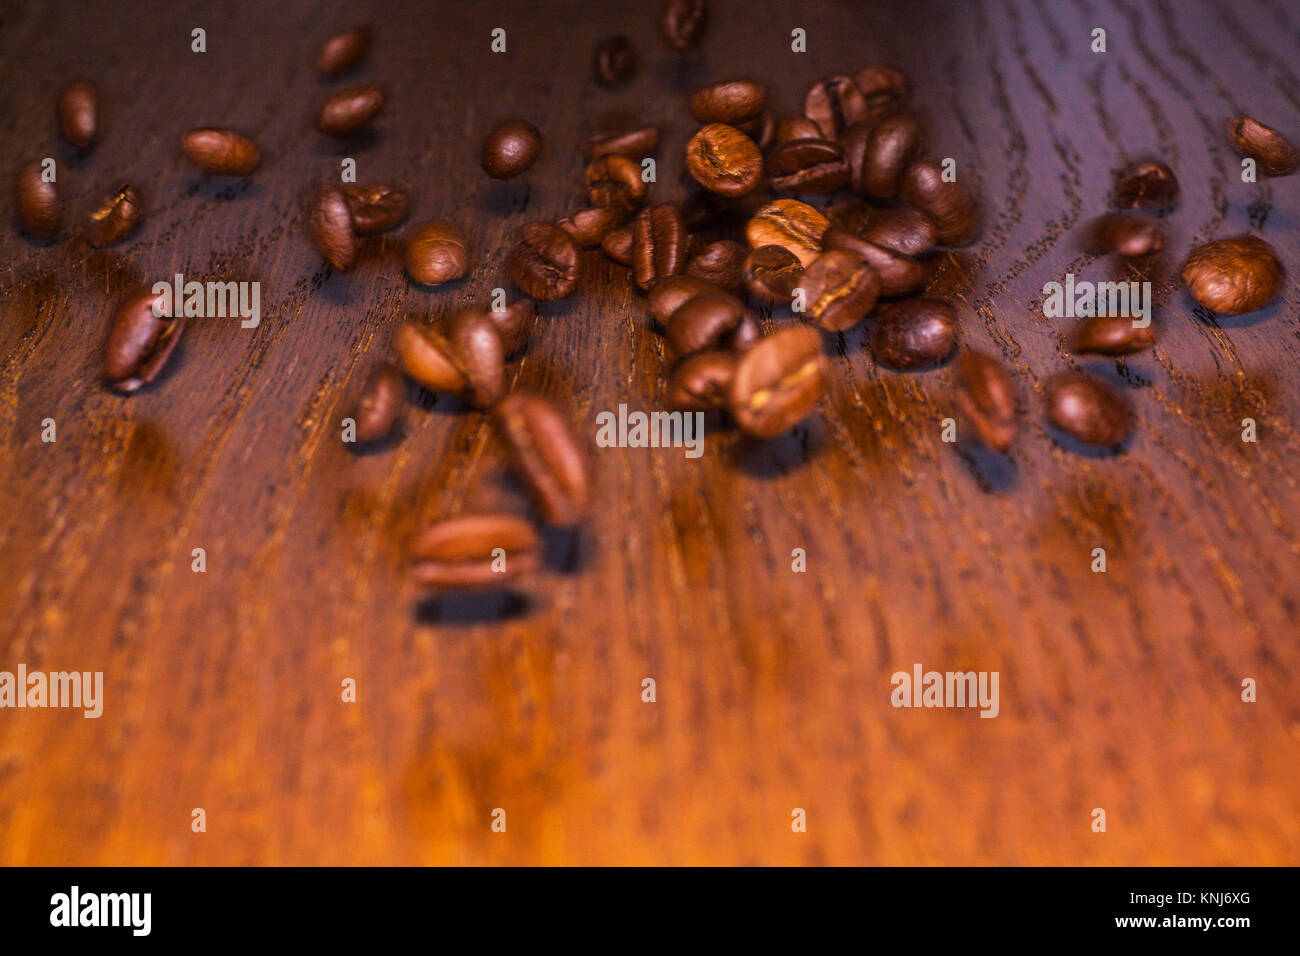 Grains of roasted coffee rolling on a wooden table. Stock Photo